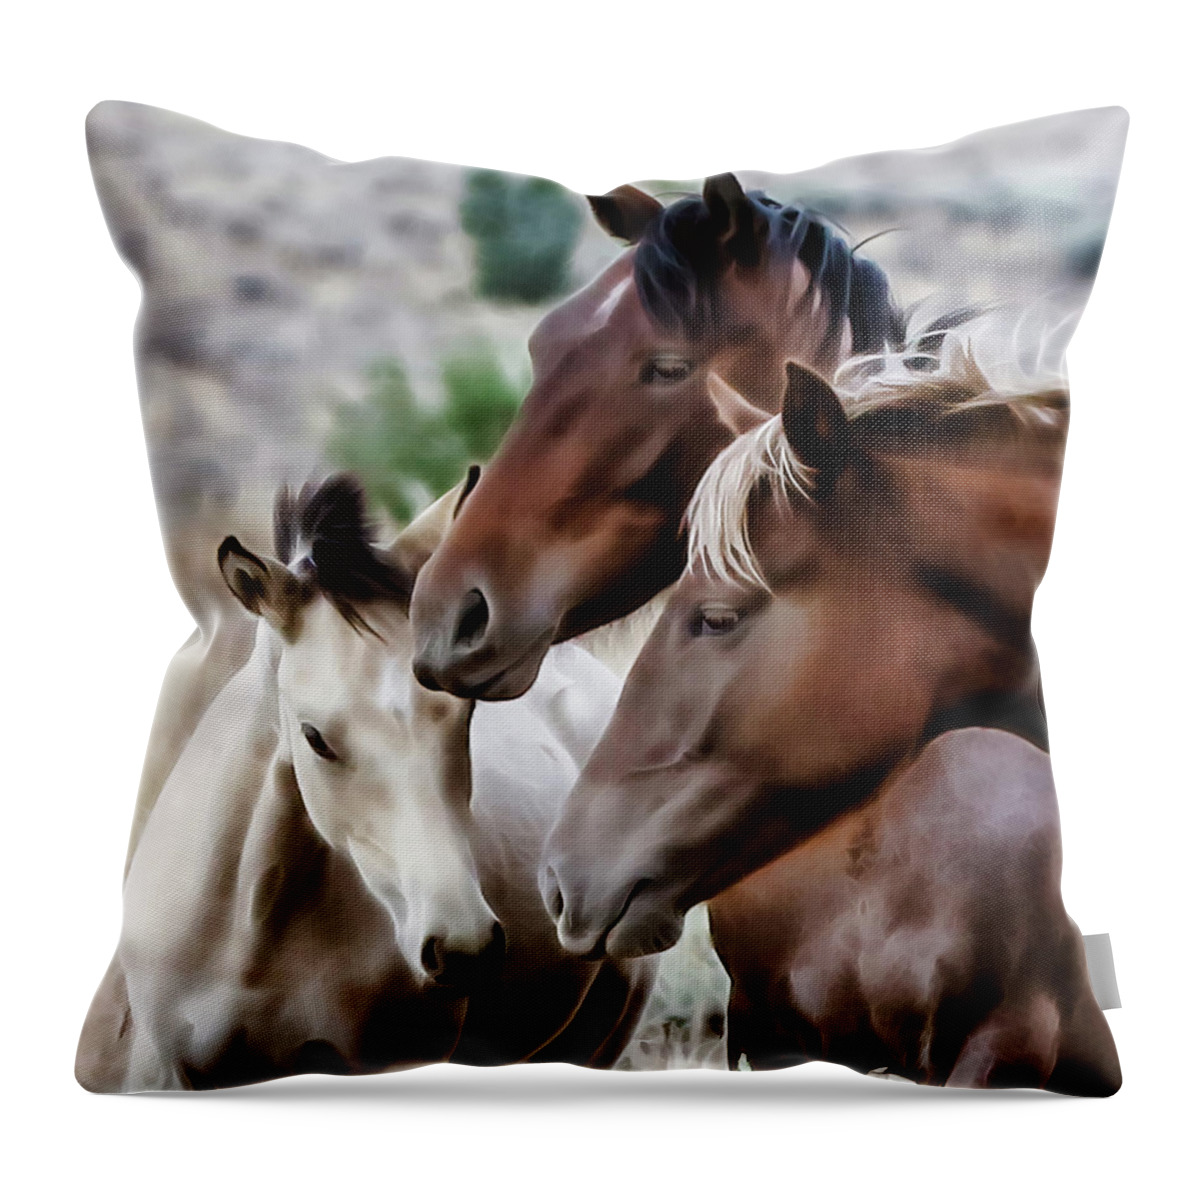 Horses Throw Pillow featuring the photograph Together by Athena Mckinzie